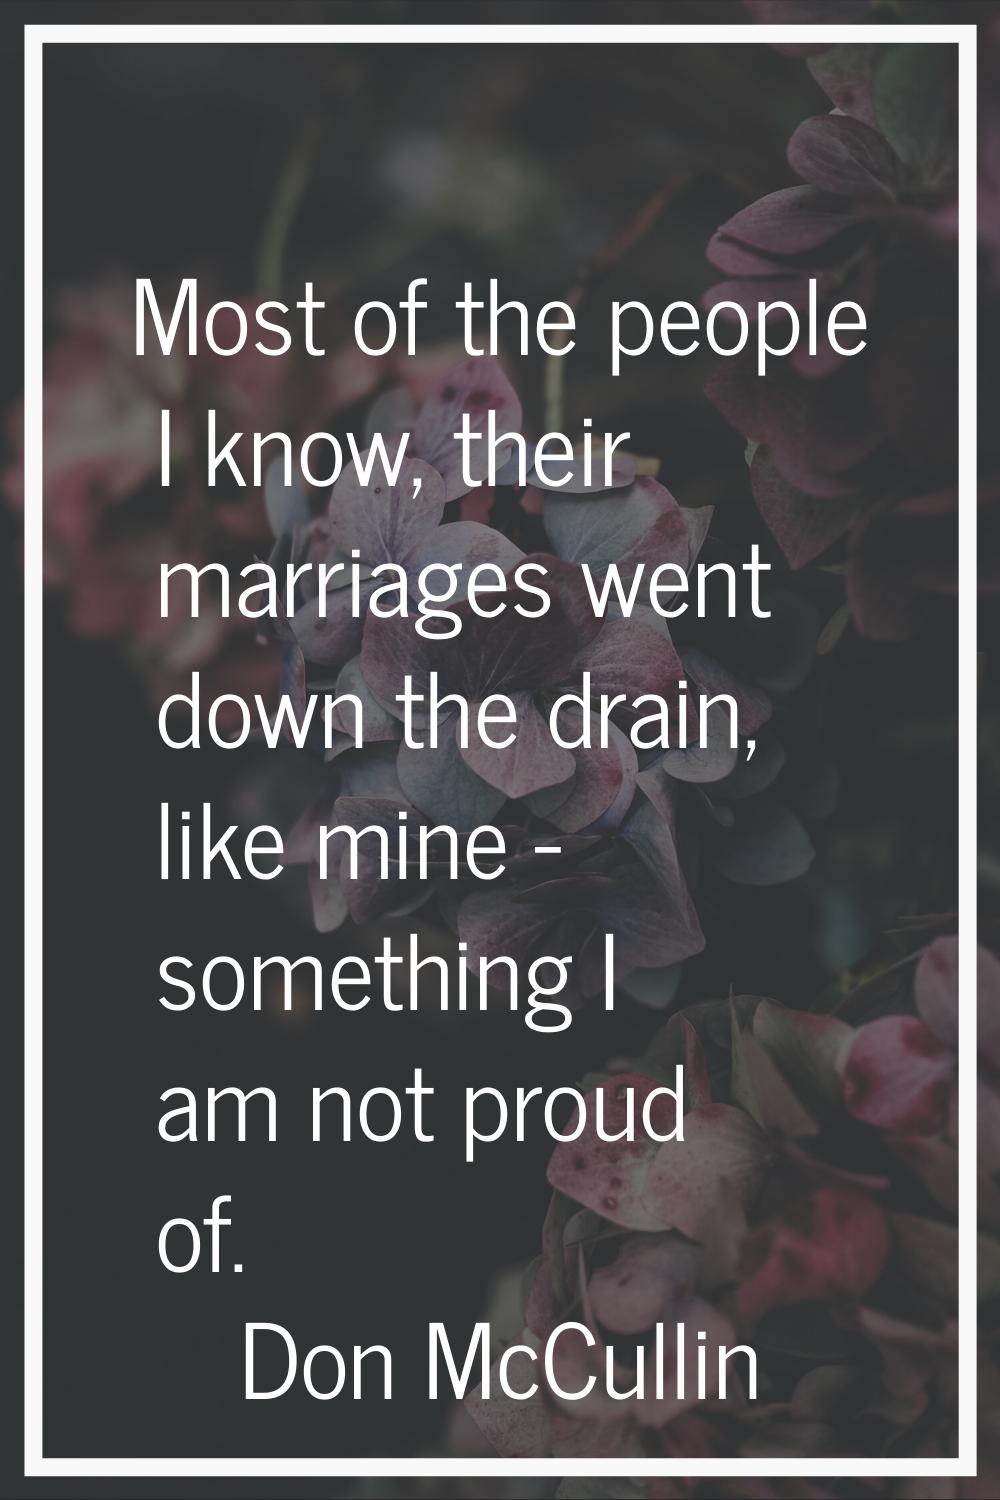 Most of the people I know, their marriages went down the drain, like mine - something I am not prou